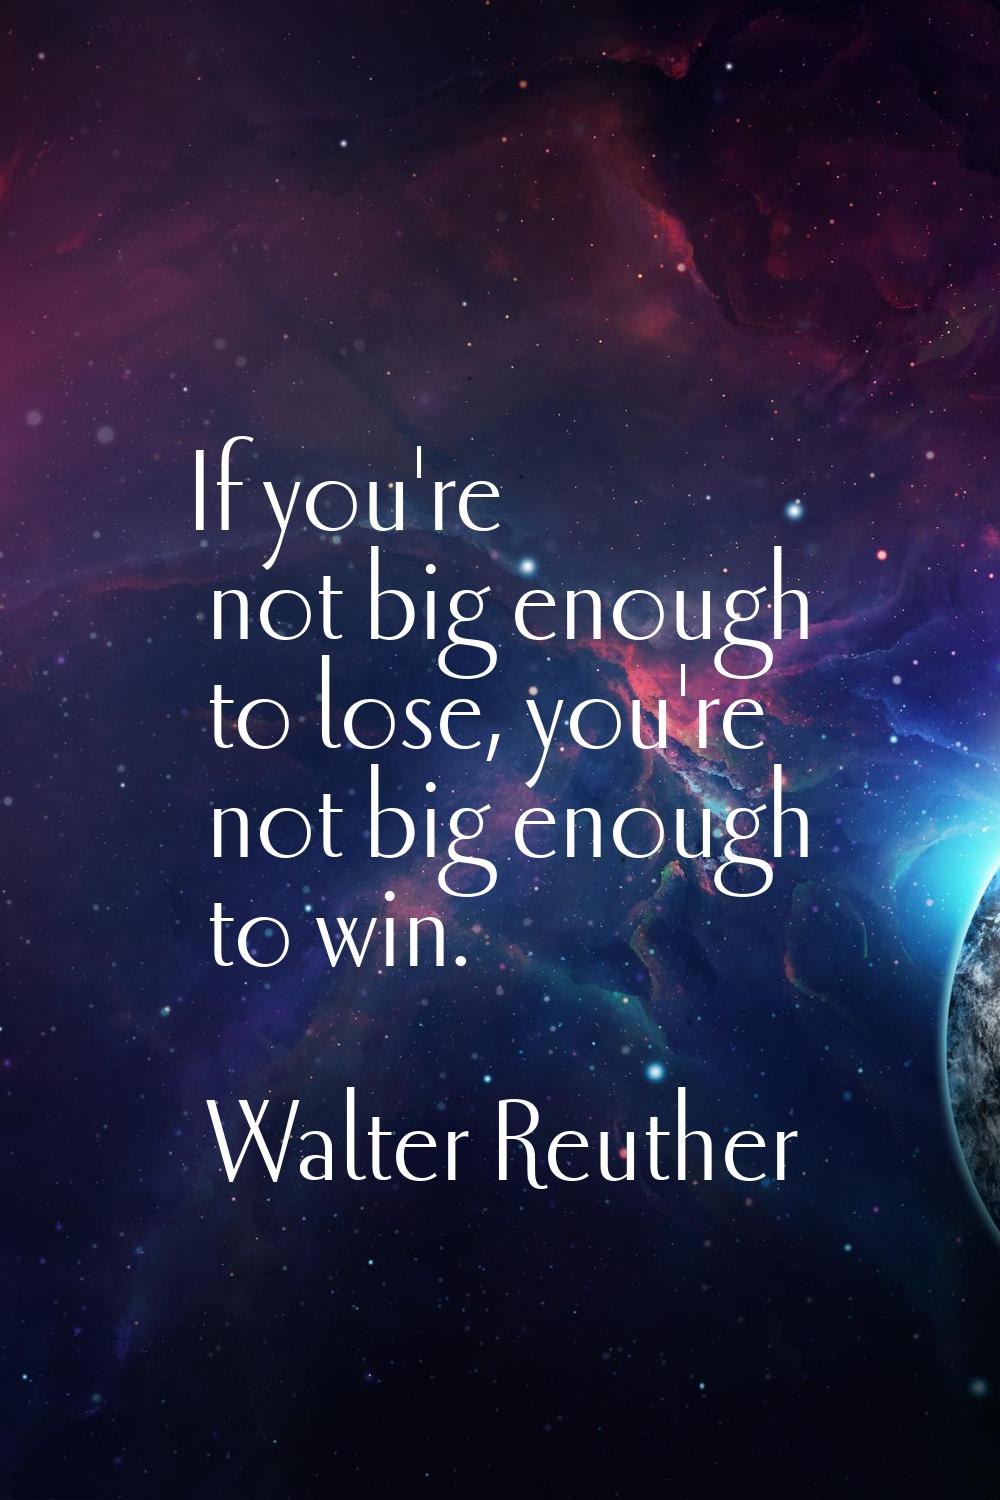 If you're not big enough to lose, you're not big enough to win.